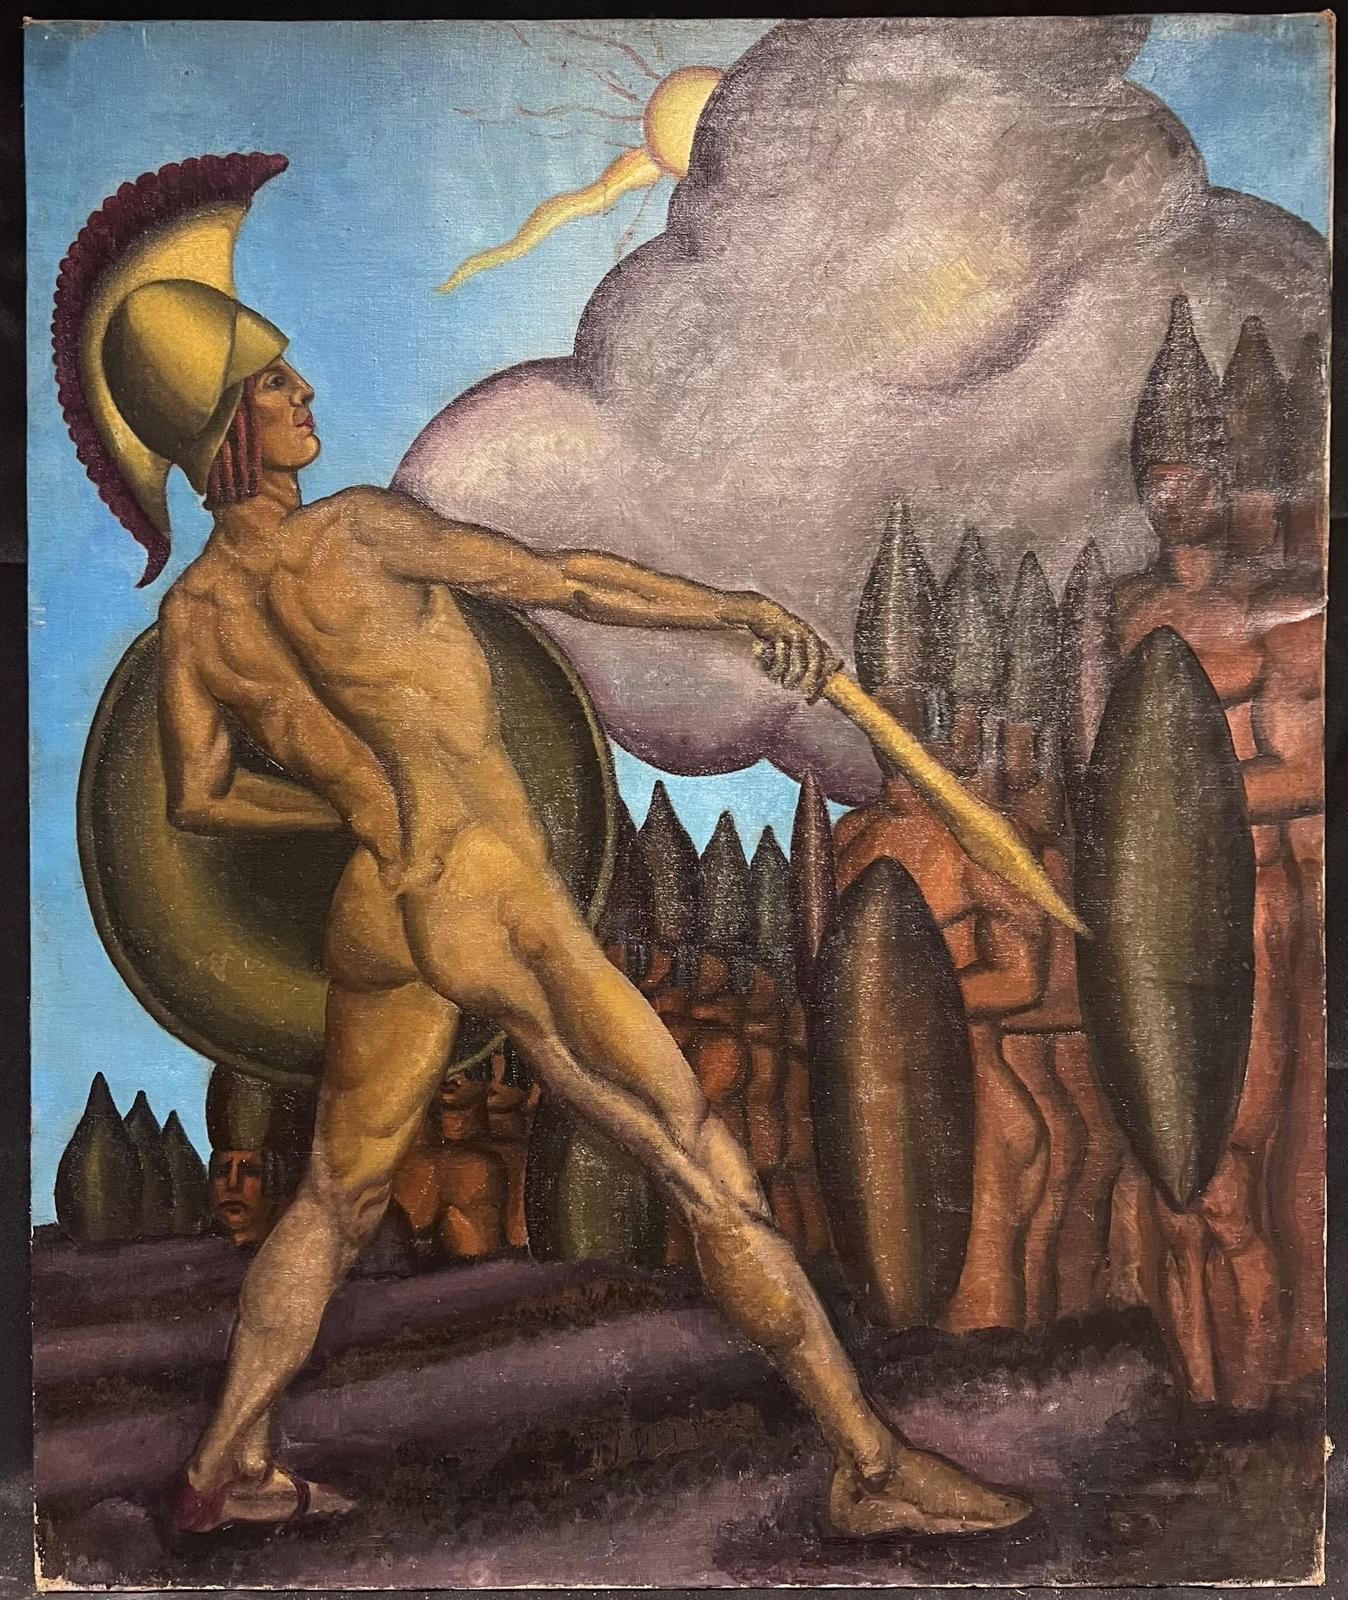 Large 1950s British Art Deco Mythological Male Nude Soldier Jason versus Spartoi - Painting by English Modernist